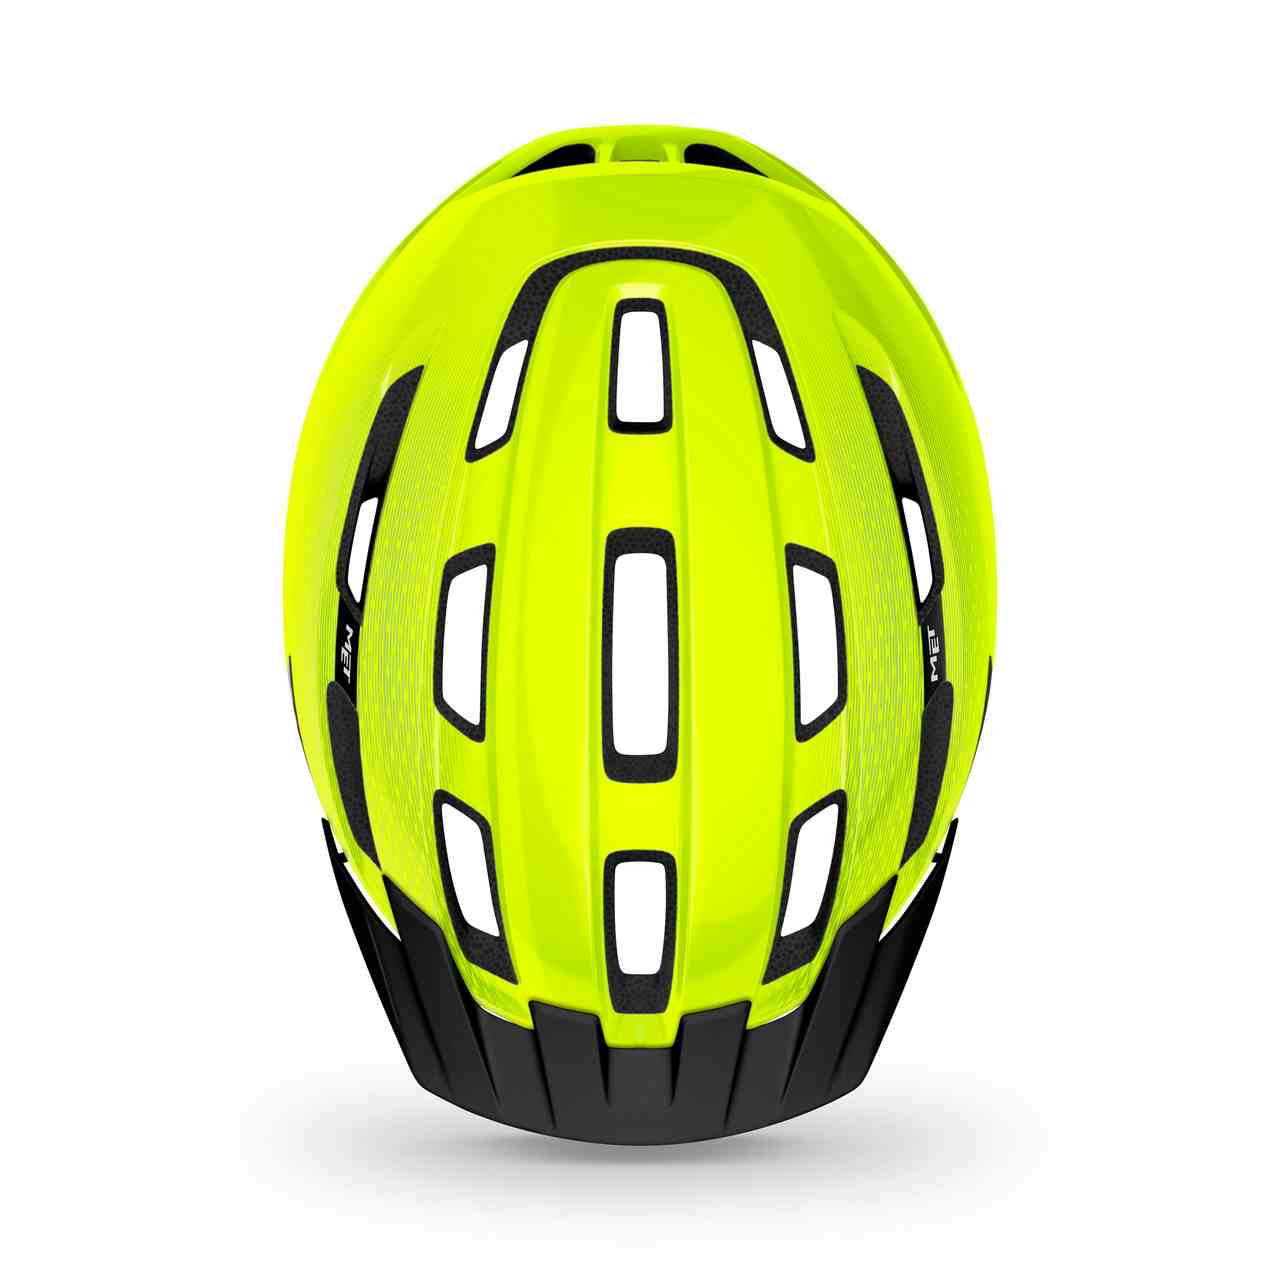 Downtown MIPS Helmet FLUO YELLOW/GLOSSY